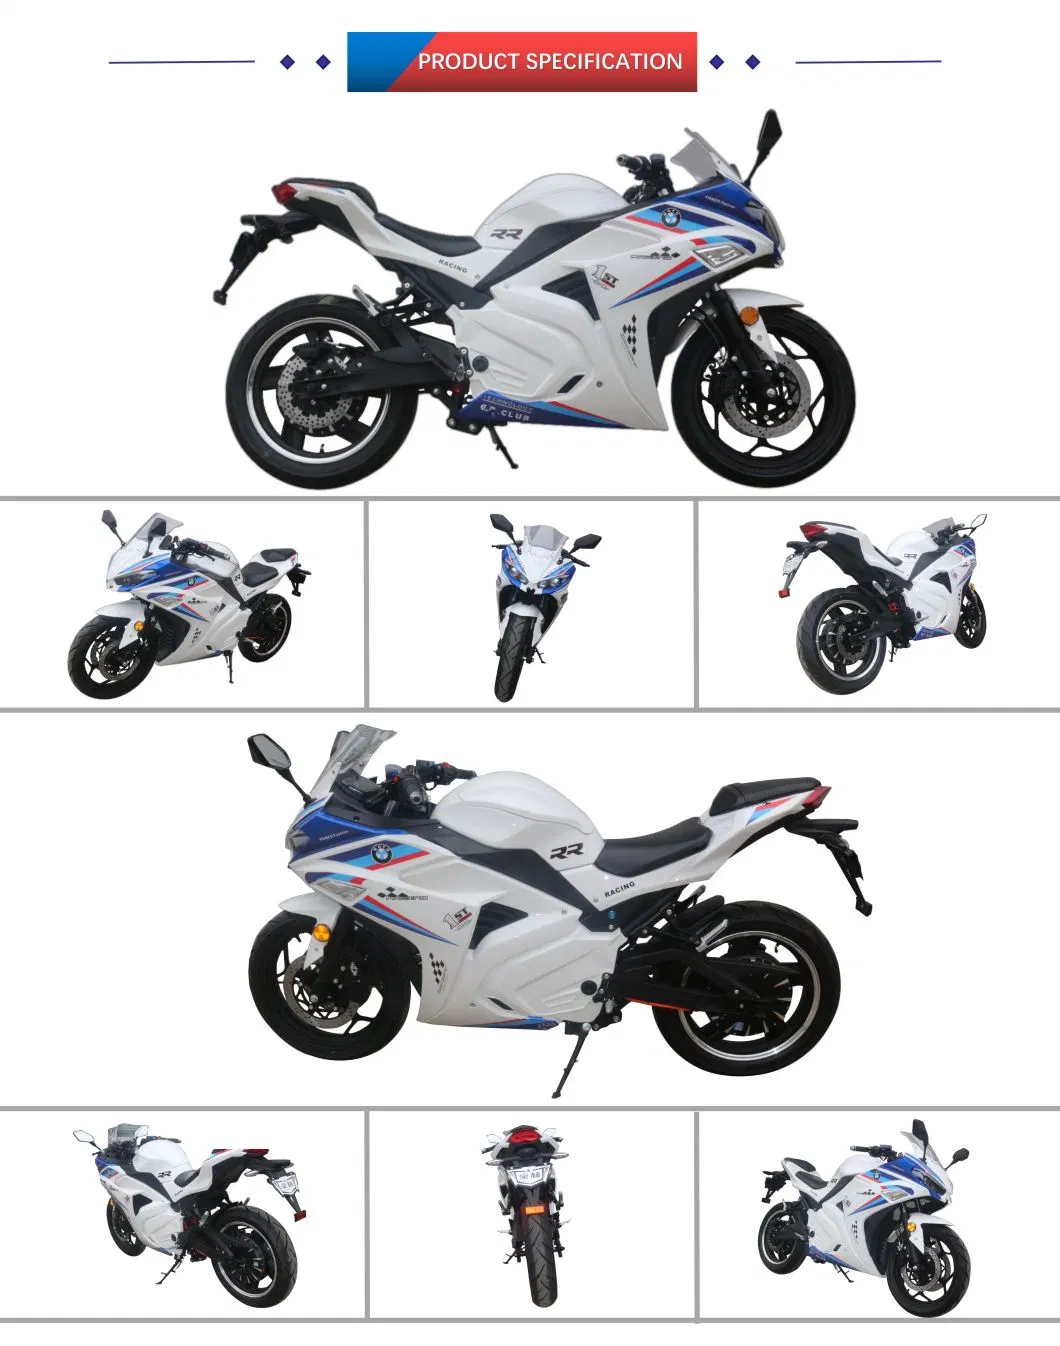 New Fashion 3000W 72V Adult Electric Motorcycle with High Speed